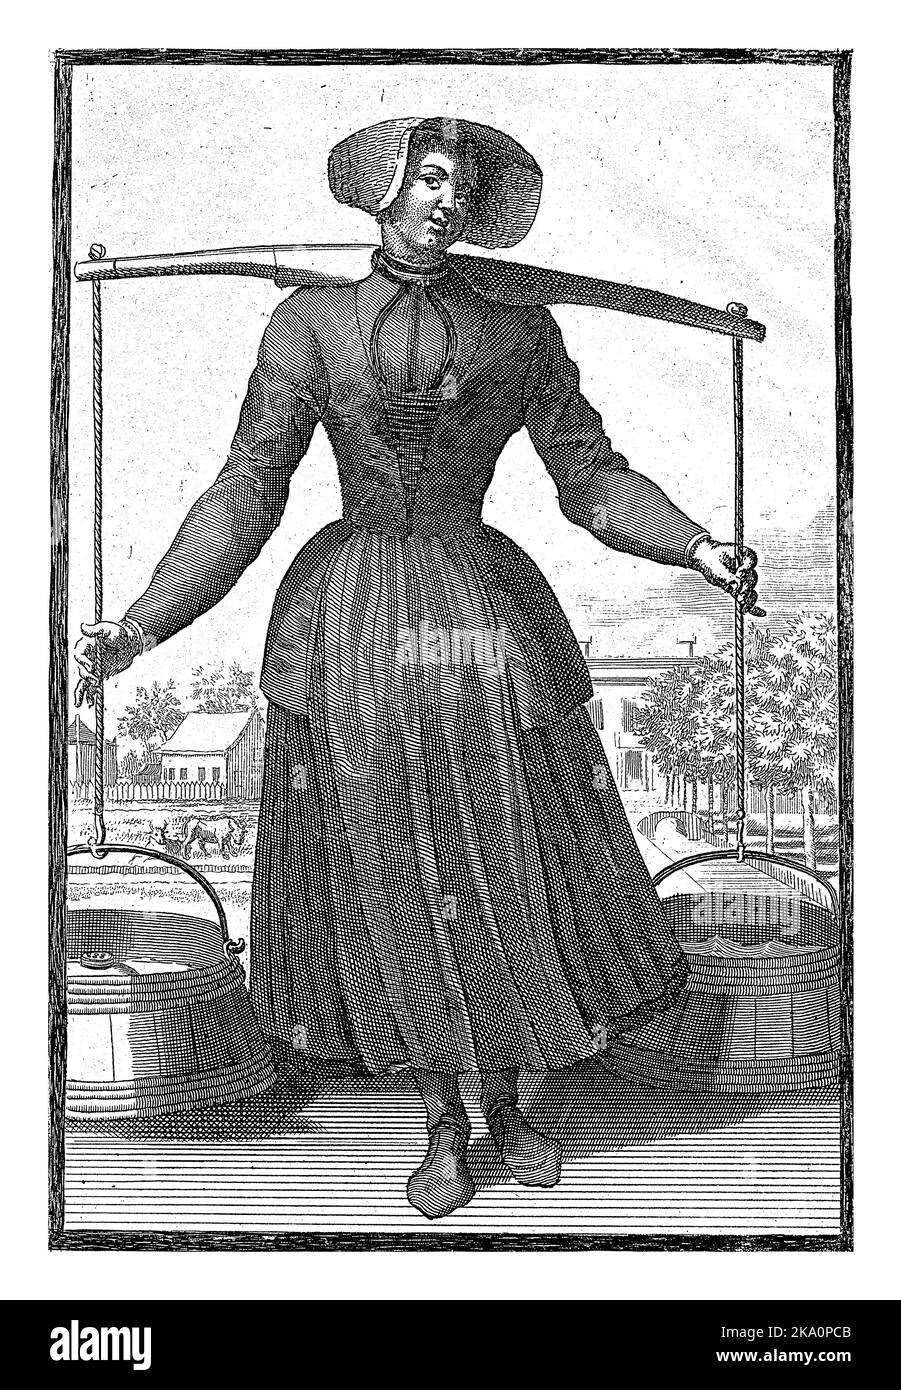 A milkmaid from Waterland carries a yoke with two buckets of milk. Print from a series of 6 prints with villagers wearing traditional costumes. Stock Photo